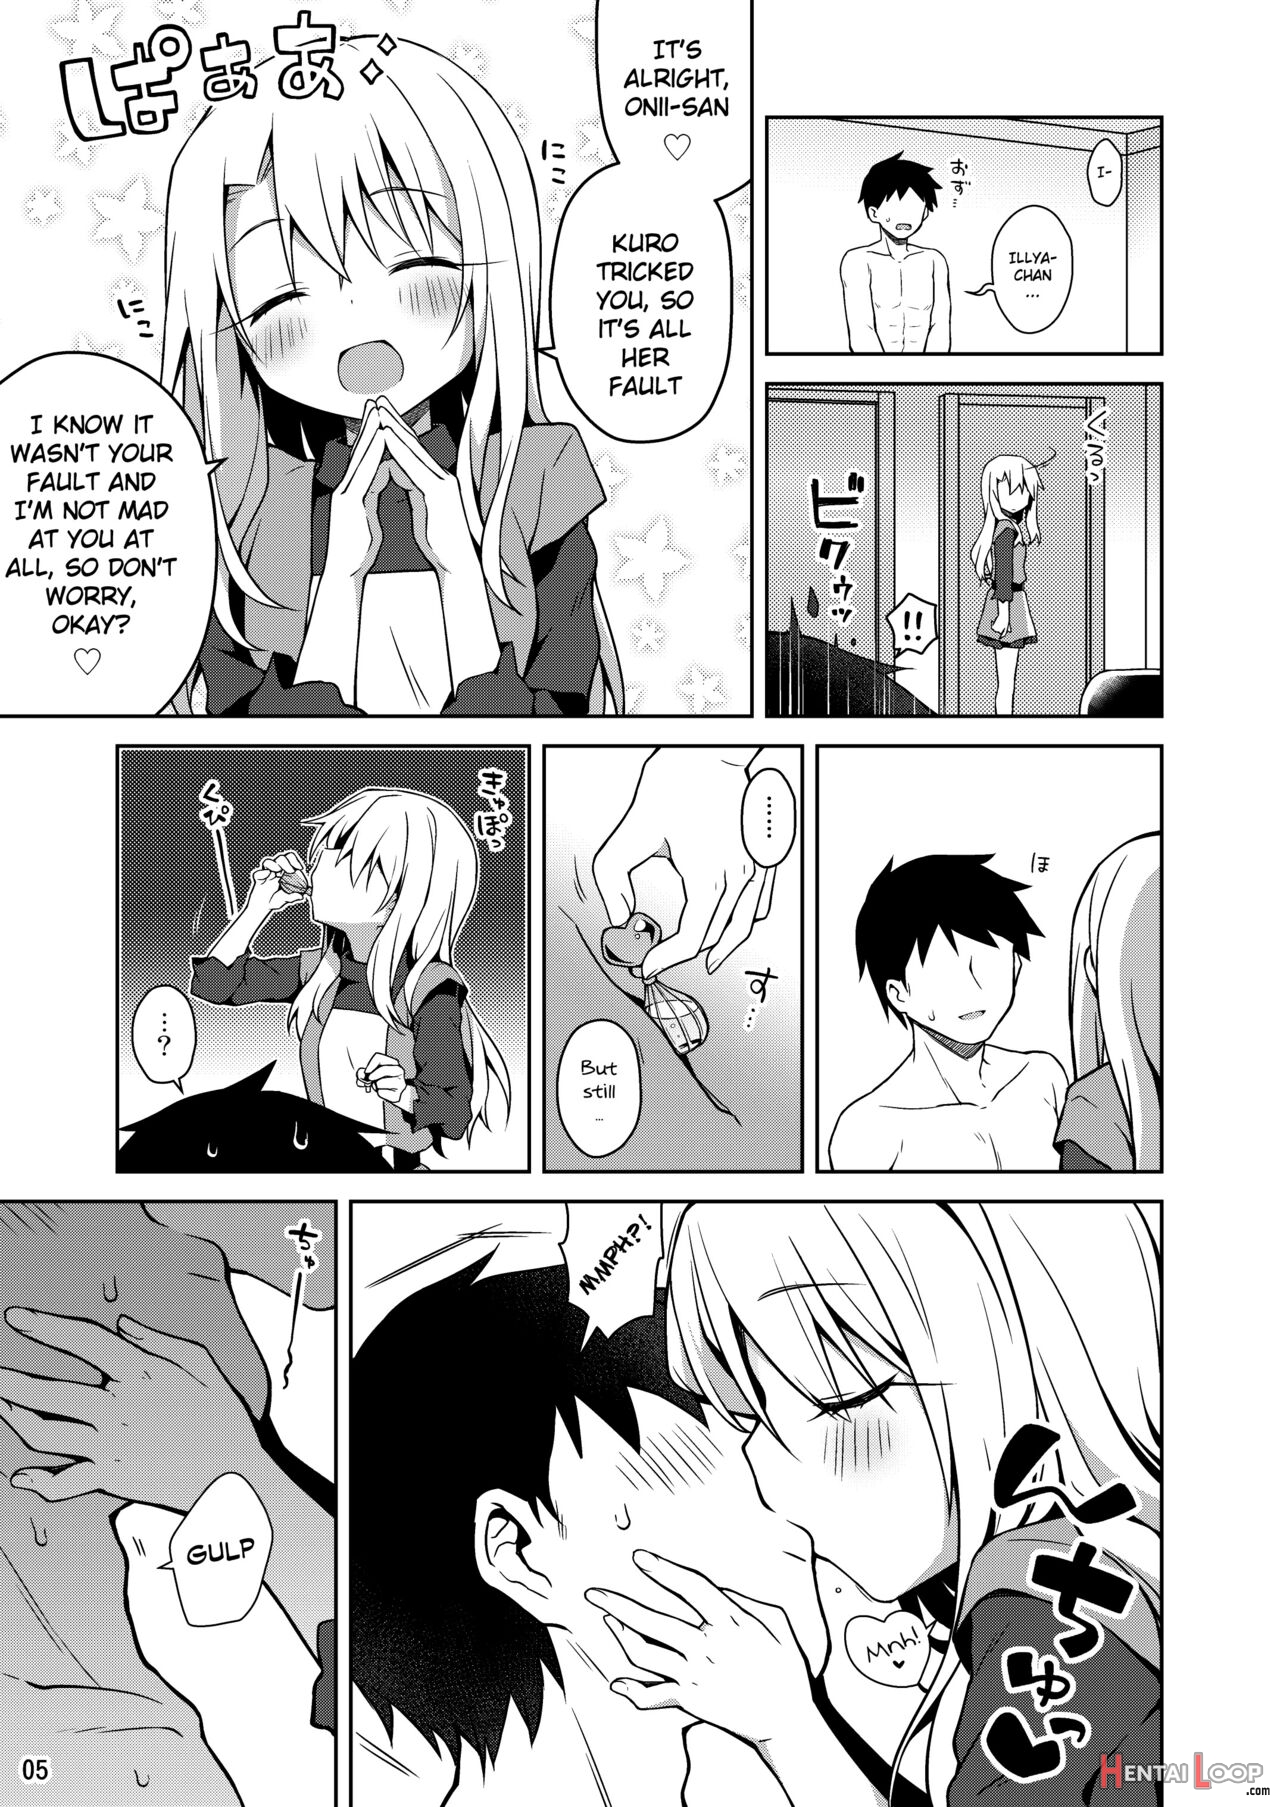 Let's Feel Even Better With Illya page 6